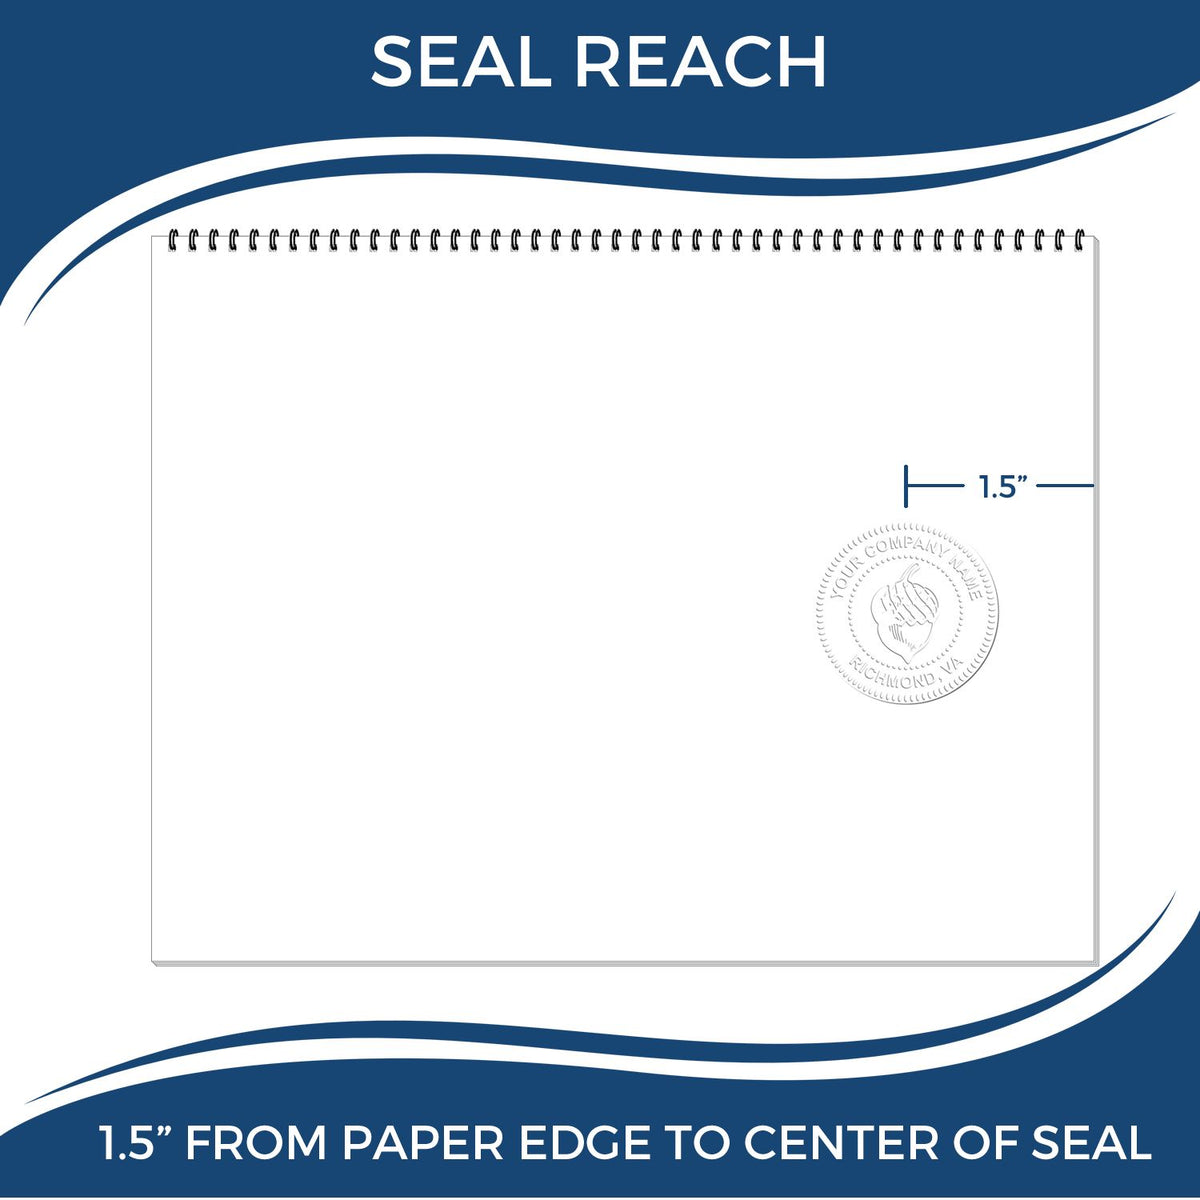 An infographic showing the seal reach which is represented by a ruler and a miniature seal image of the State of New Jersey Soft Land Surveyor Embossing Seal